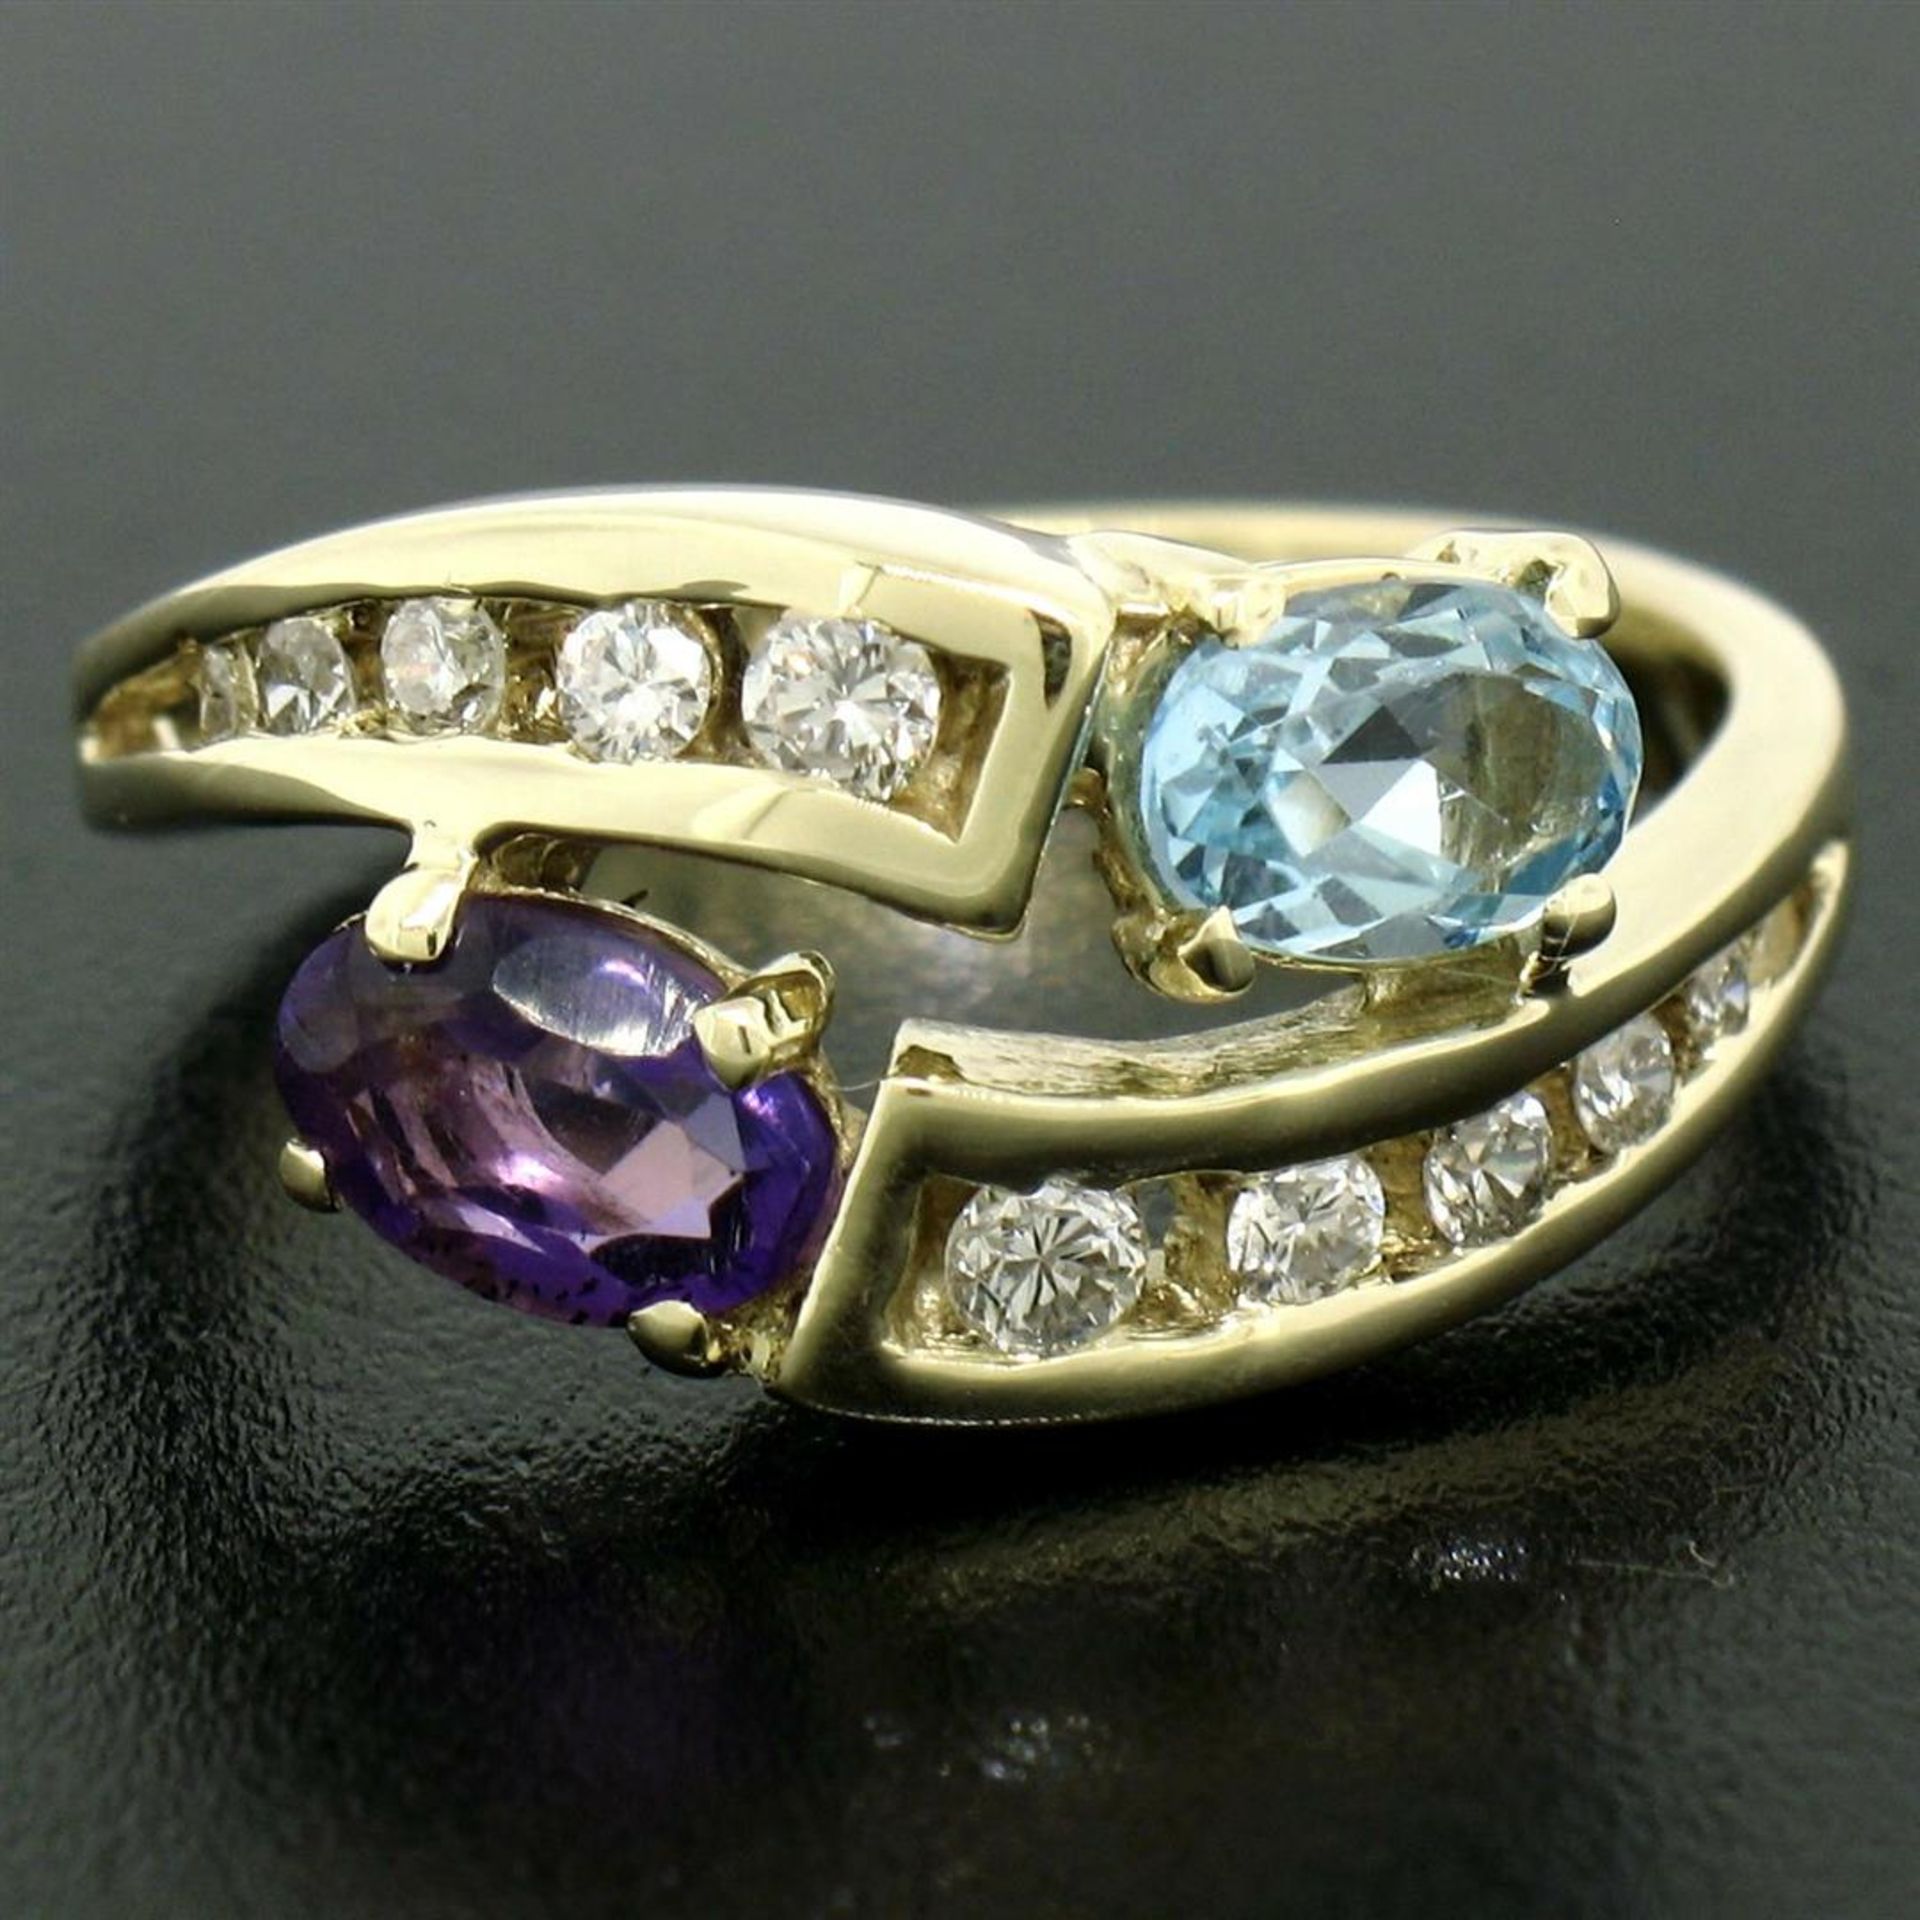 14K Yellow Gold 1.21 ctw Oval Amethyst & Blue Topaz Bypass Ring w/ Round Diamond - Image 2 of 9